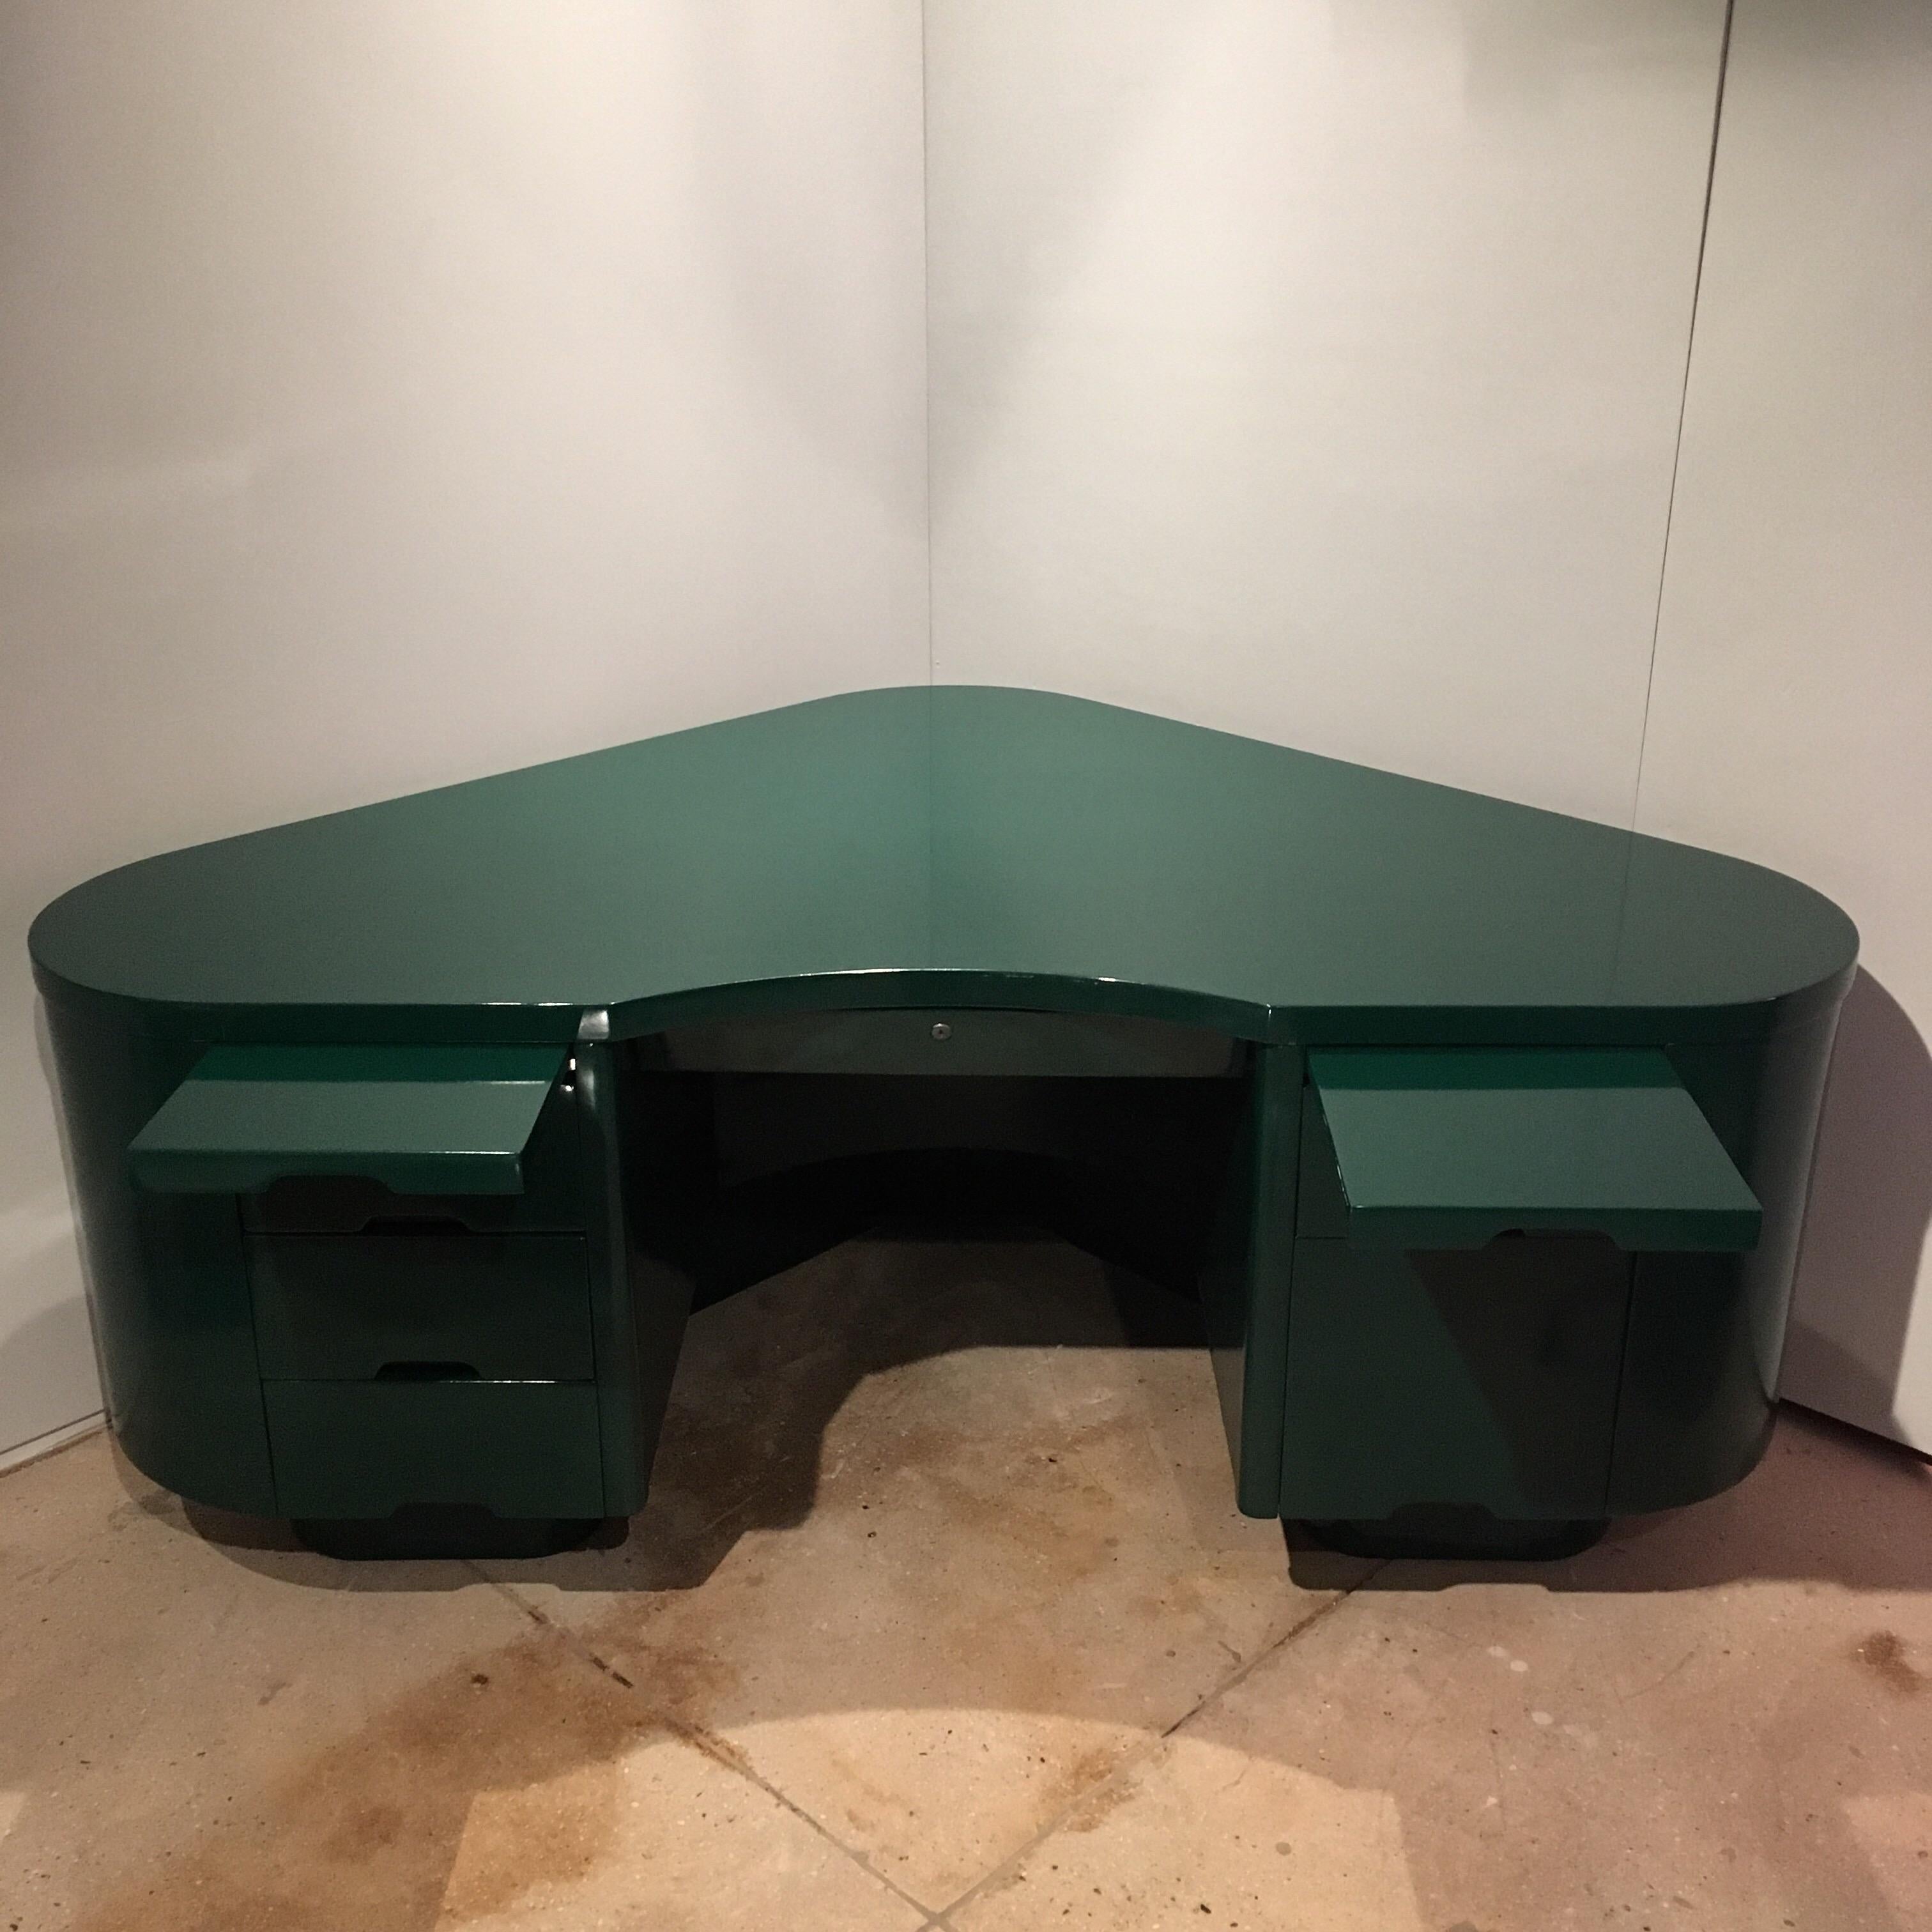 An iconic American Art Deco desk originally designed by Hughes Aircraft circa 1920 by Fletcher Aviation. An early model with a 